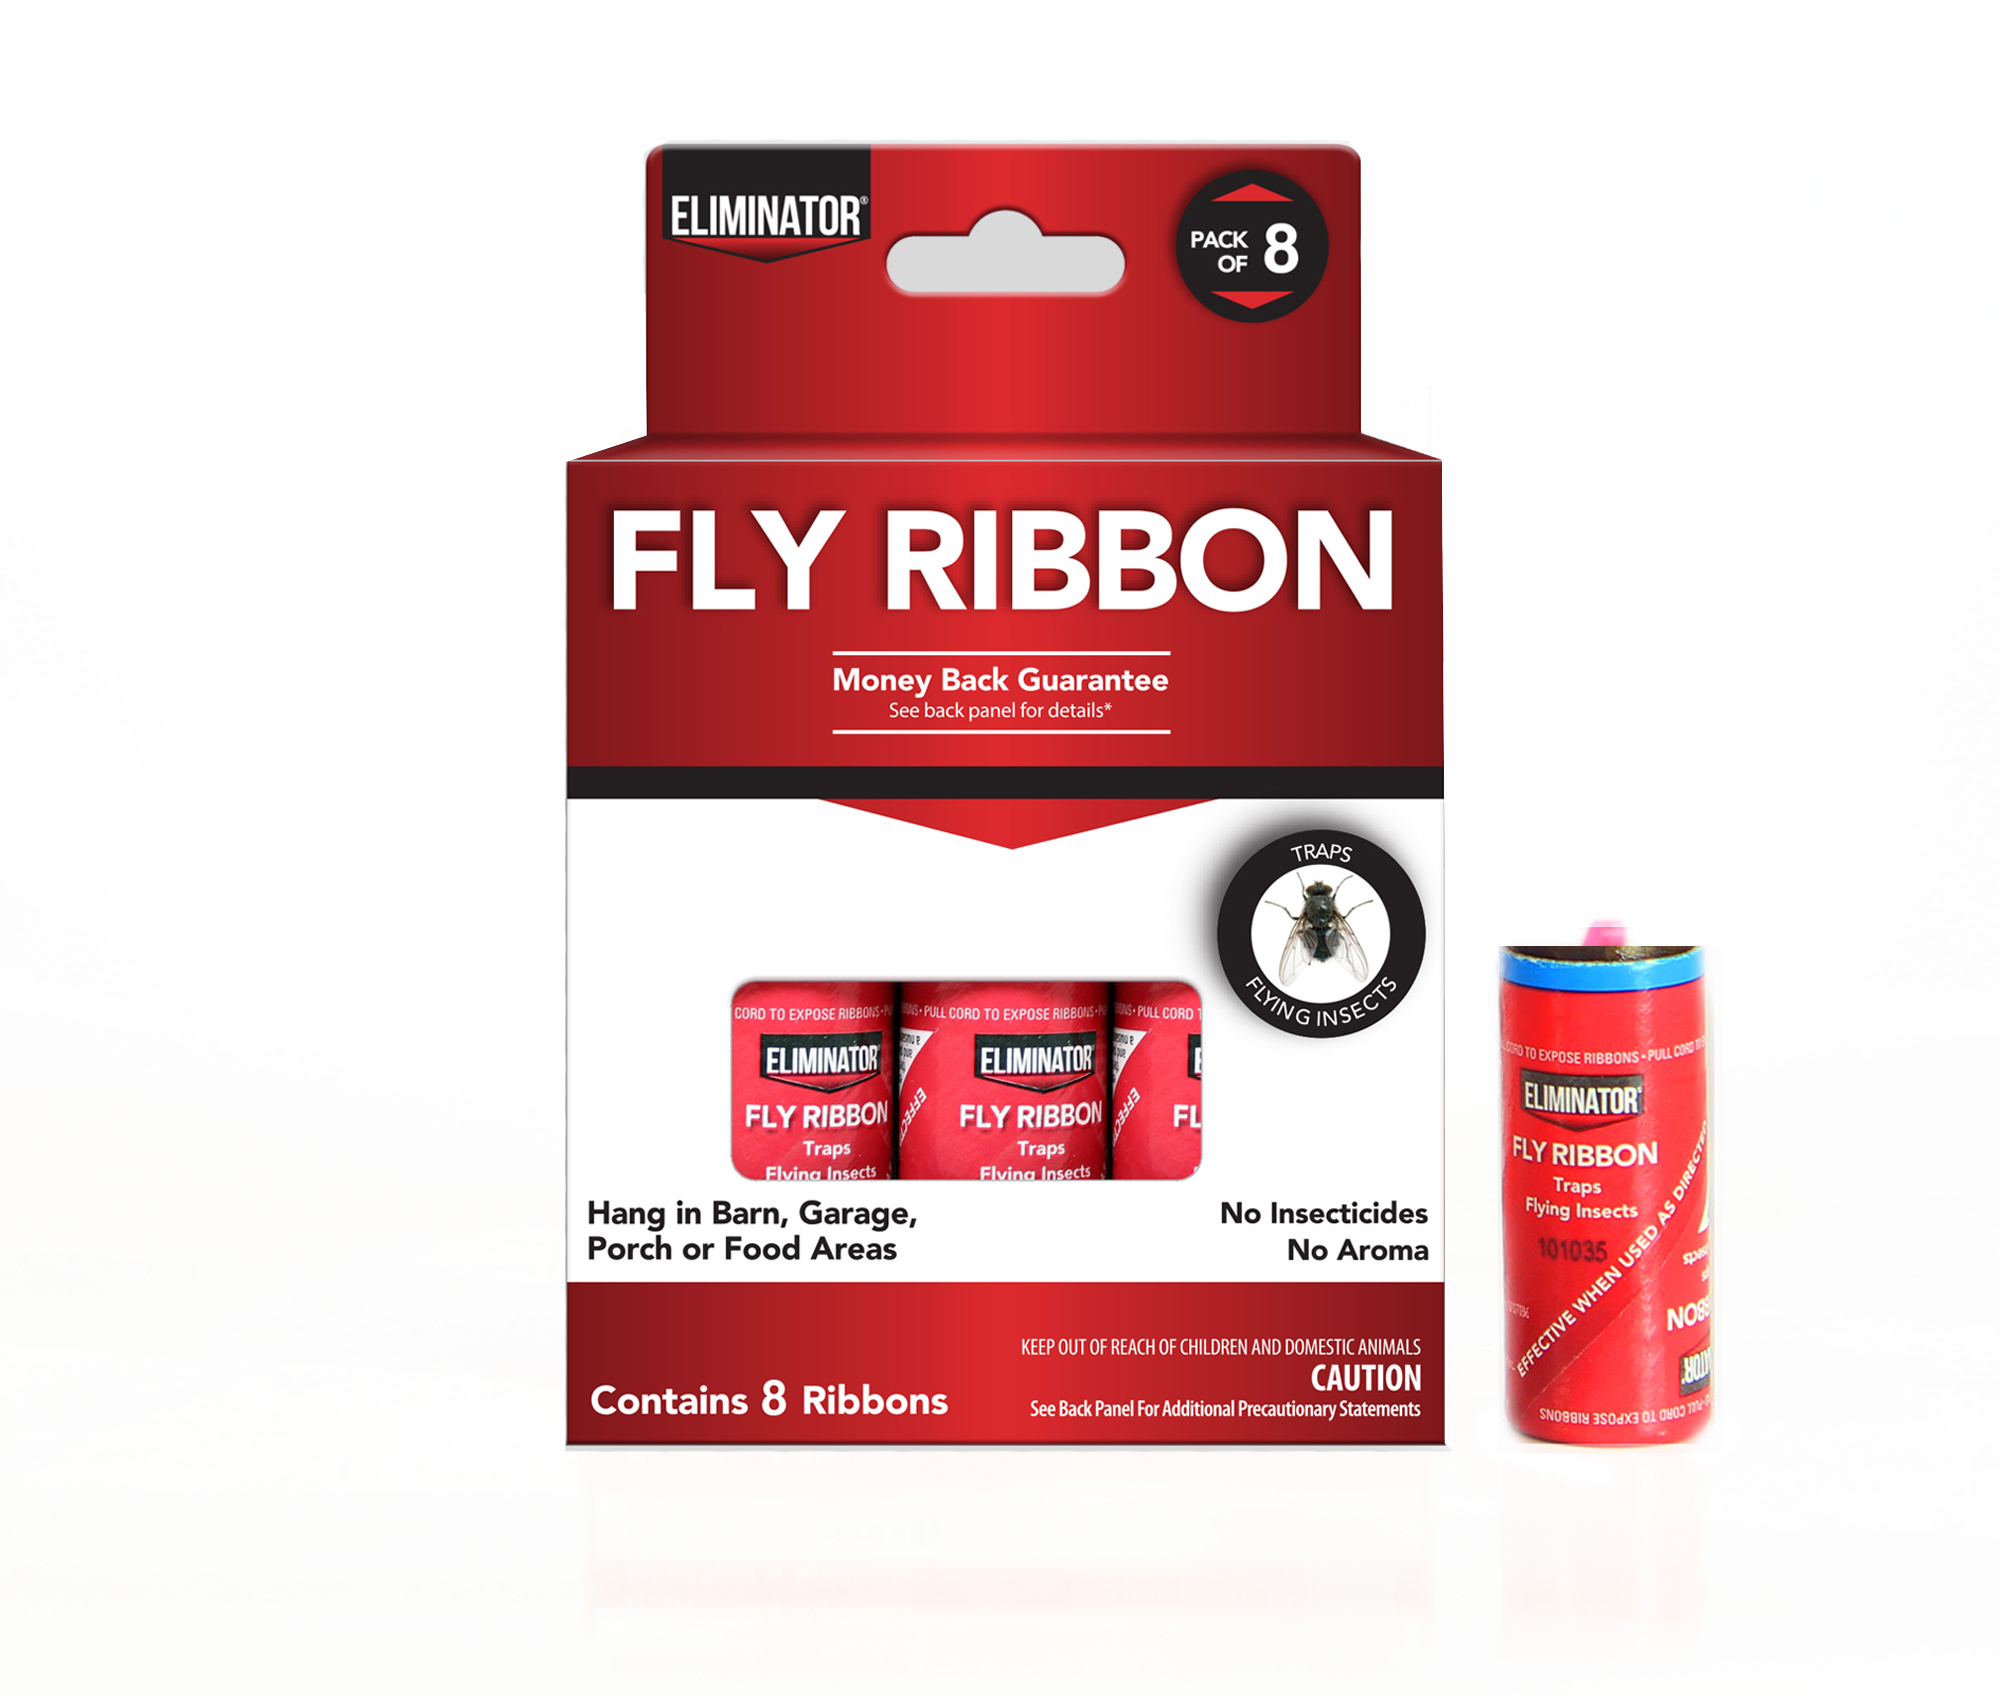 Eliminator Non-Toxic Fly Ribbon, Sticky Paper, Traps Flying Insects, Pack 